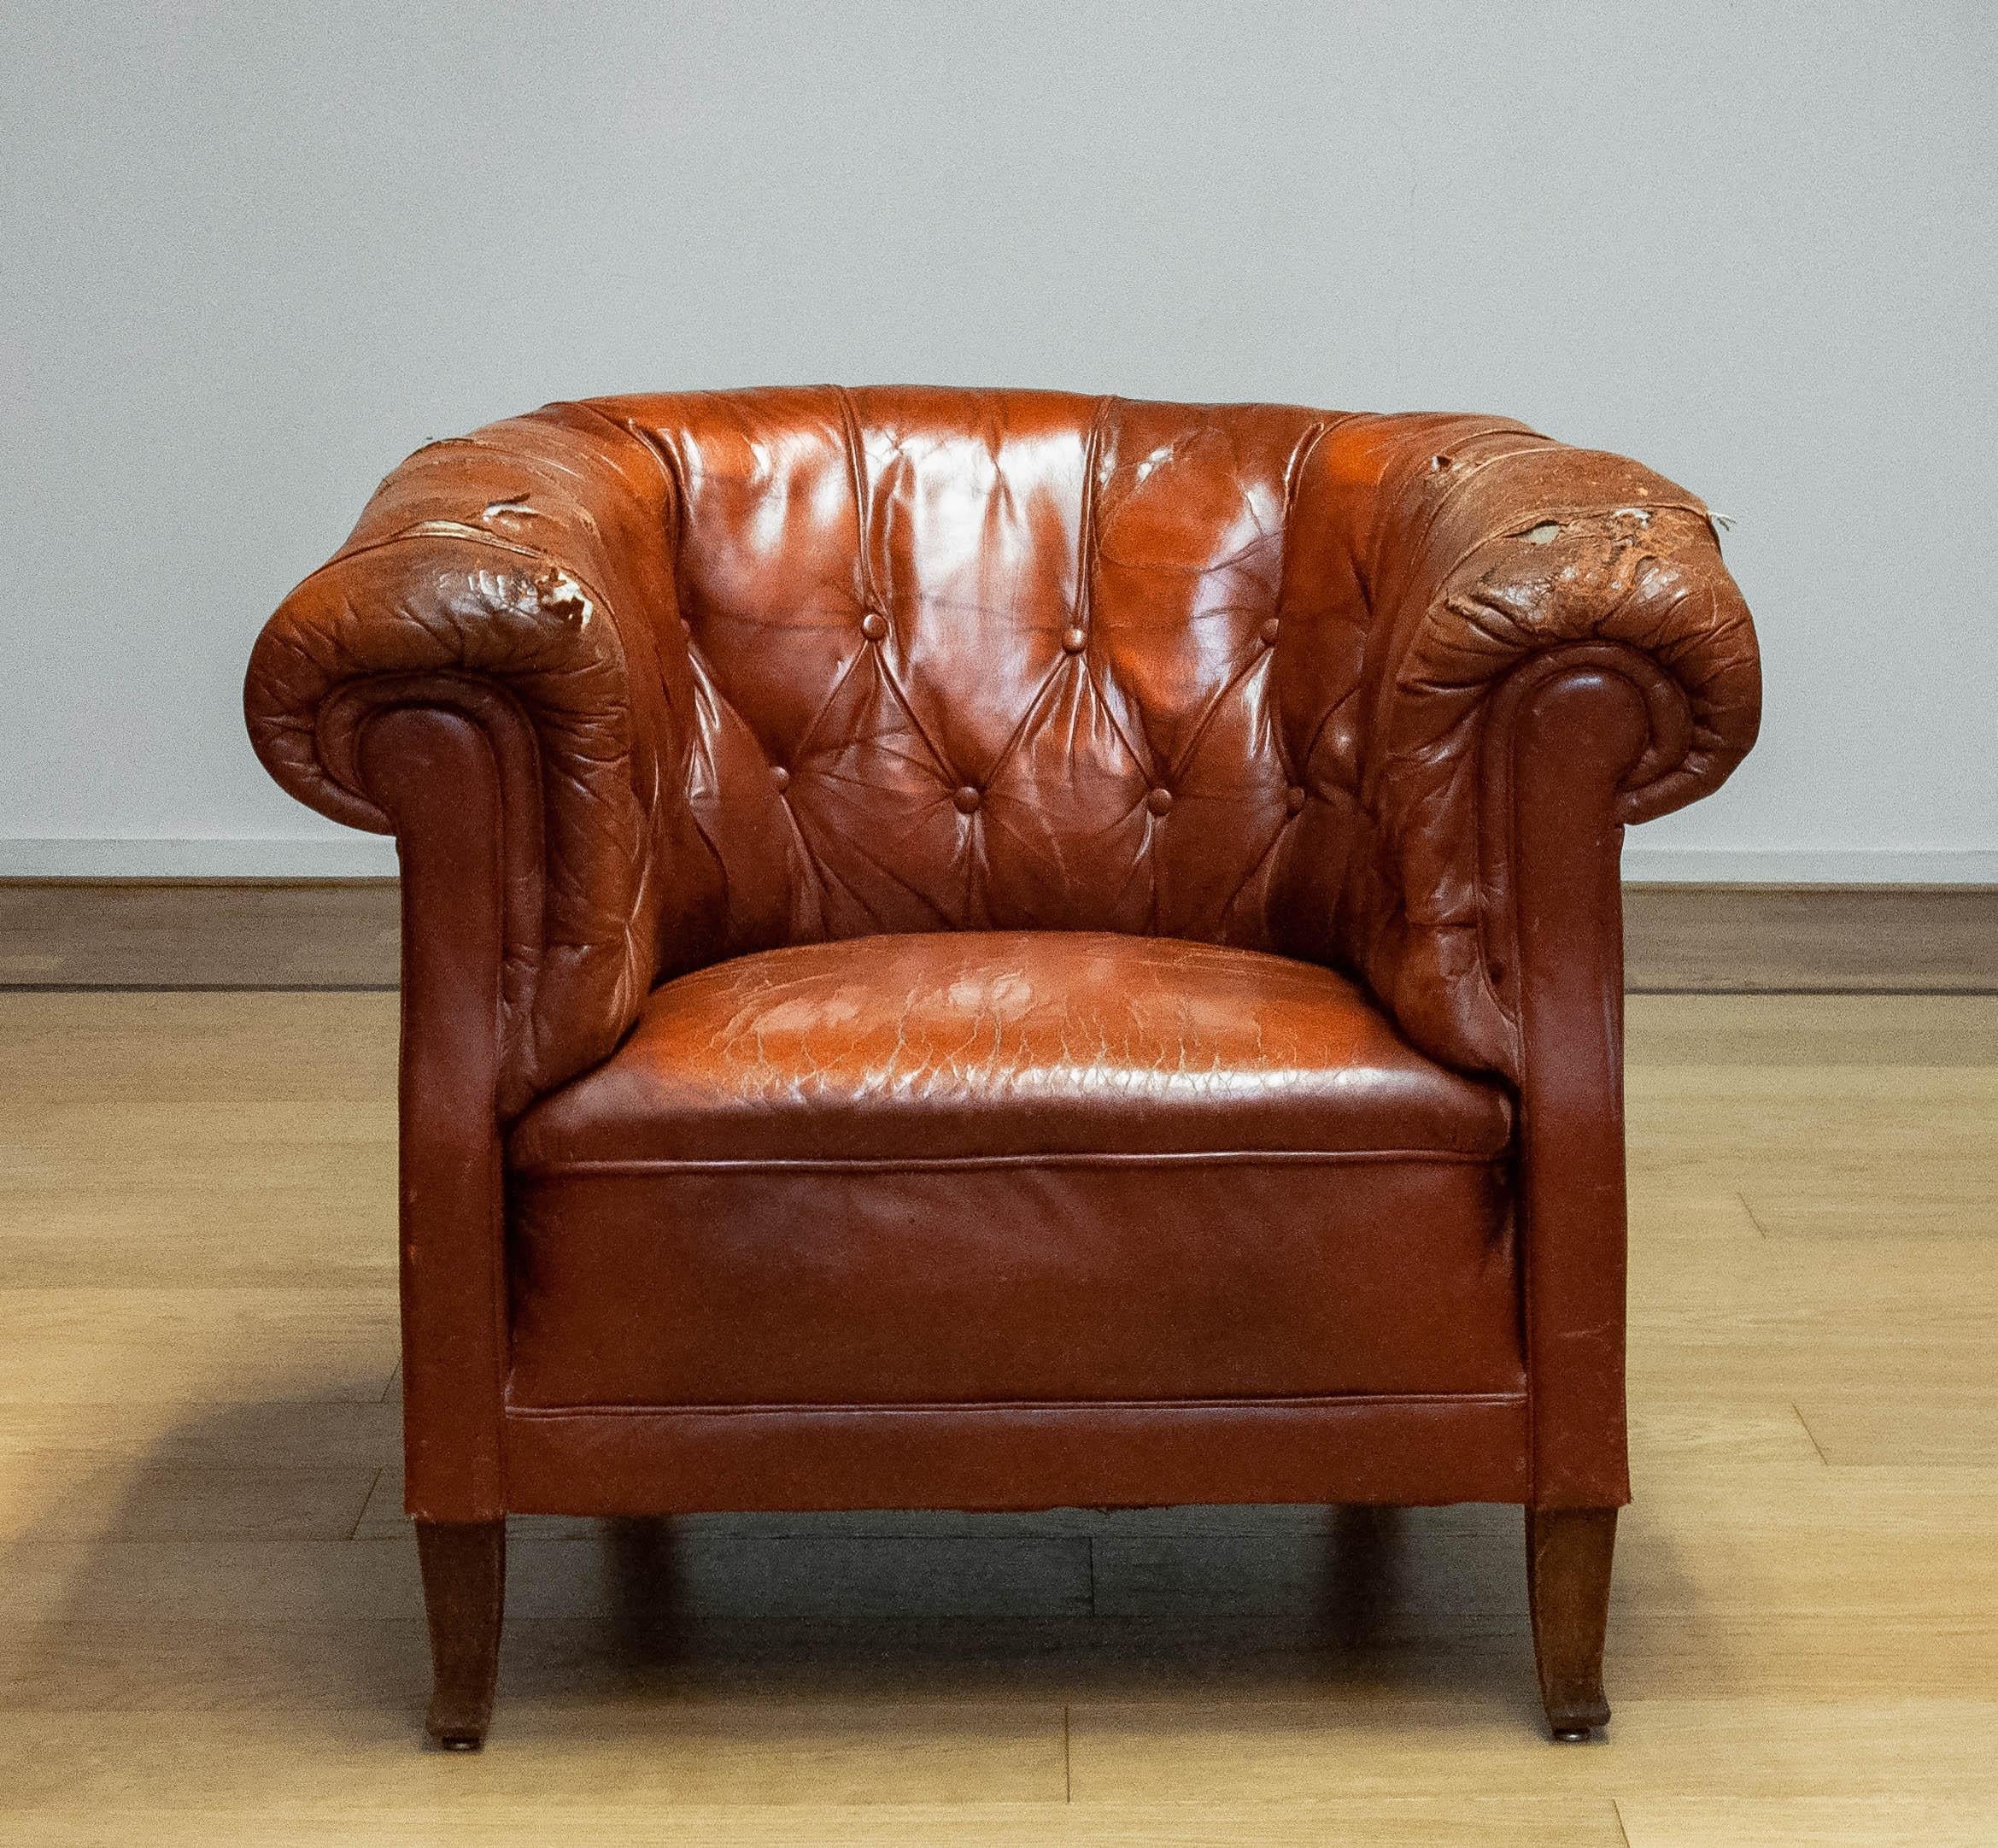 1940s Swedish Tufted Club Chair 'Chesterfield Model' In Tan Brown Worn Leather 6